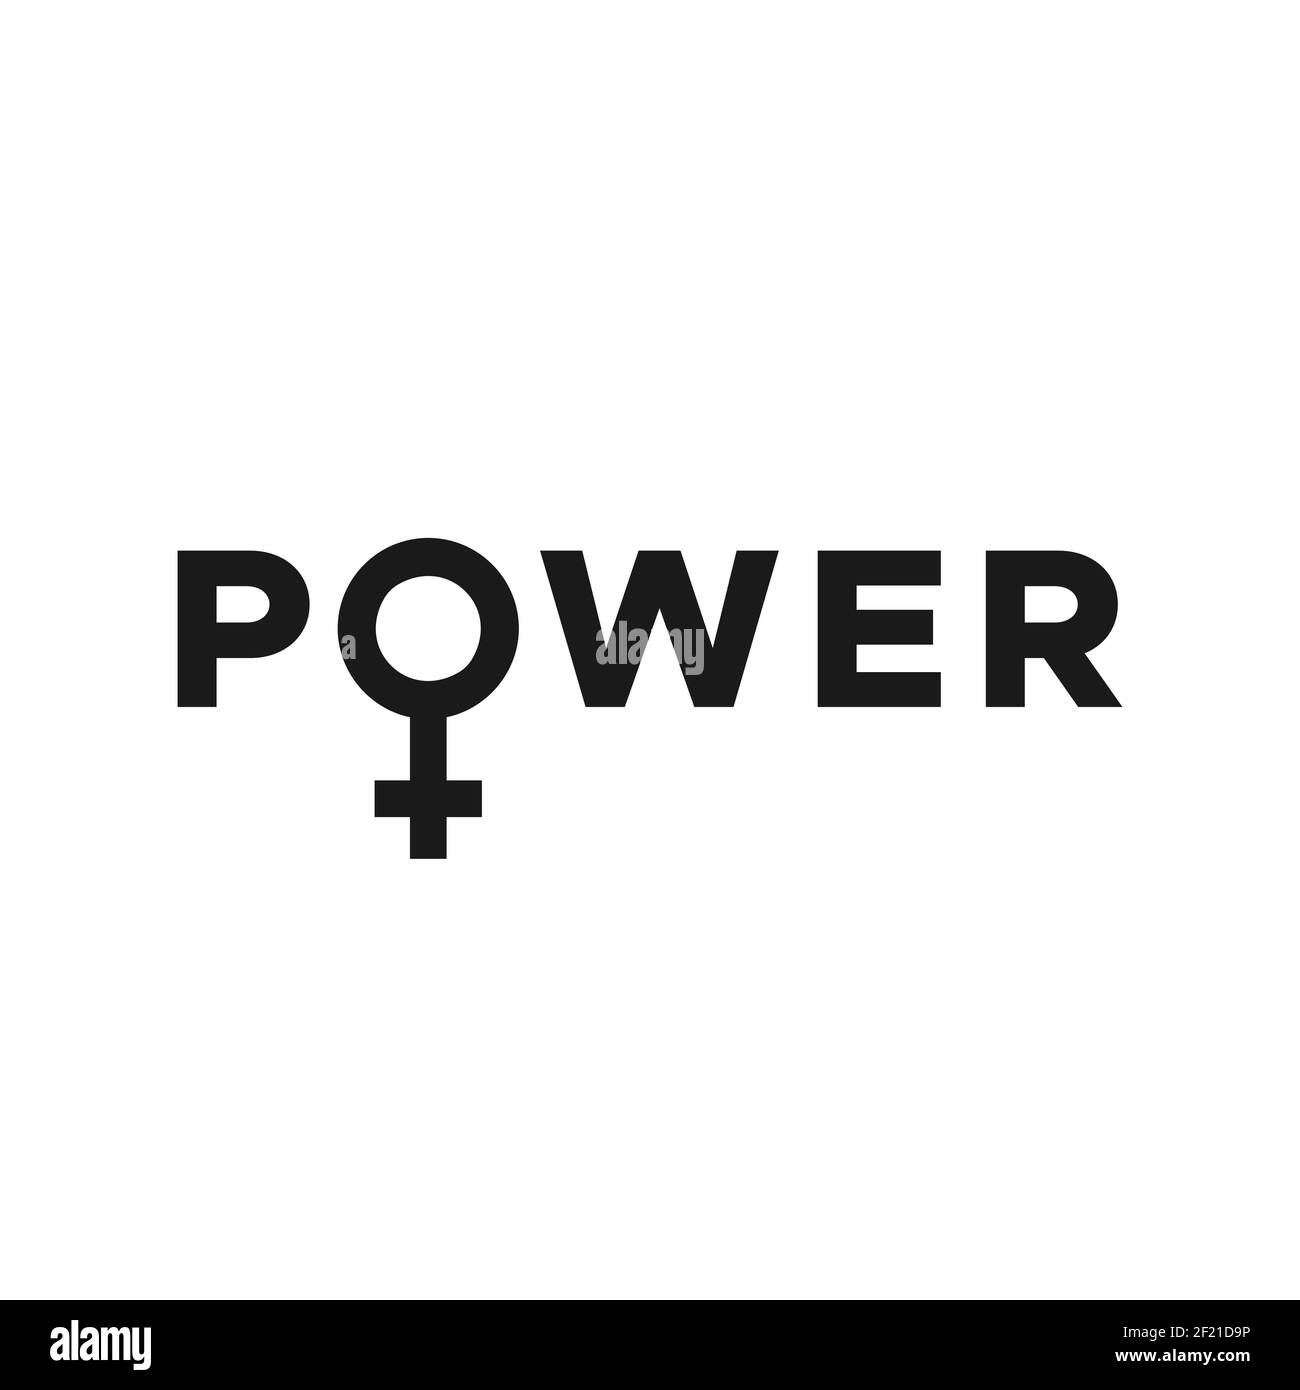 Power. The word power with the women symbol. Black color. Motivational phrase. Feminist quote. Vector illustration, flat design Stock Vector